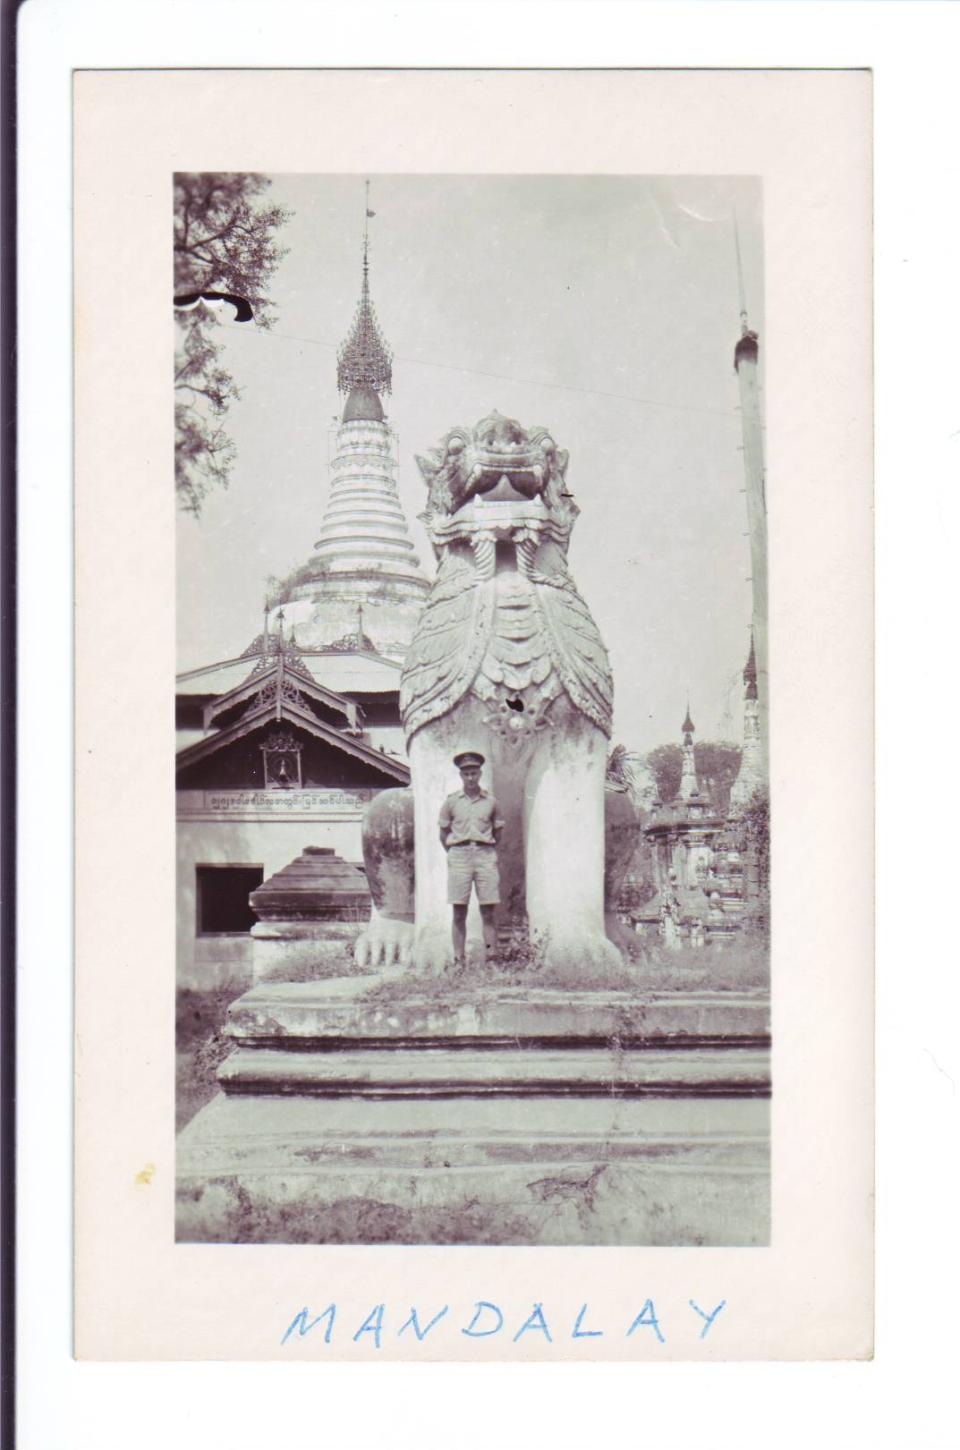 Photo #95
Statue in Mandalay
In the country of Maynmar
Asia